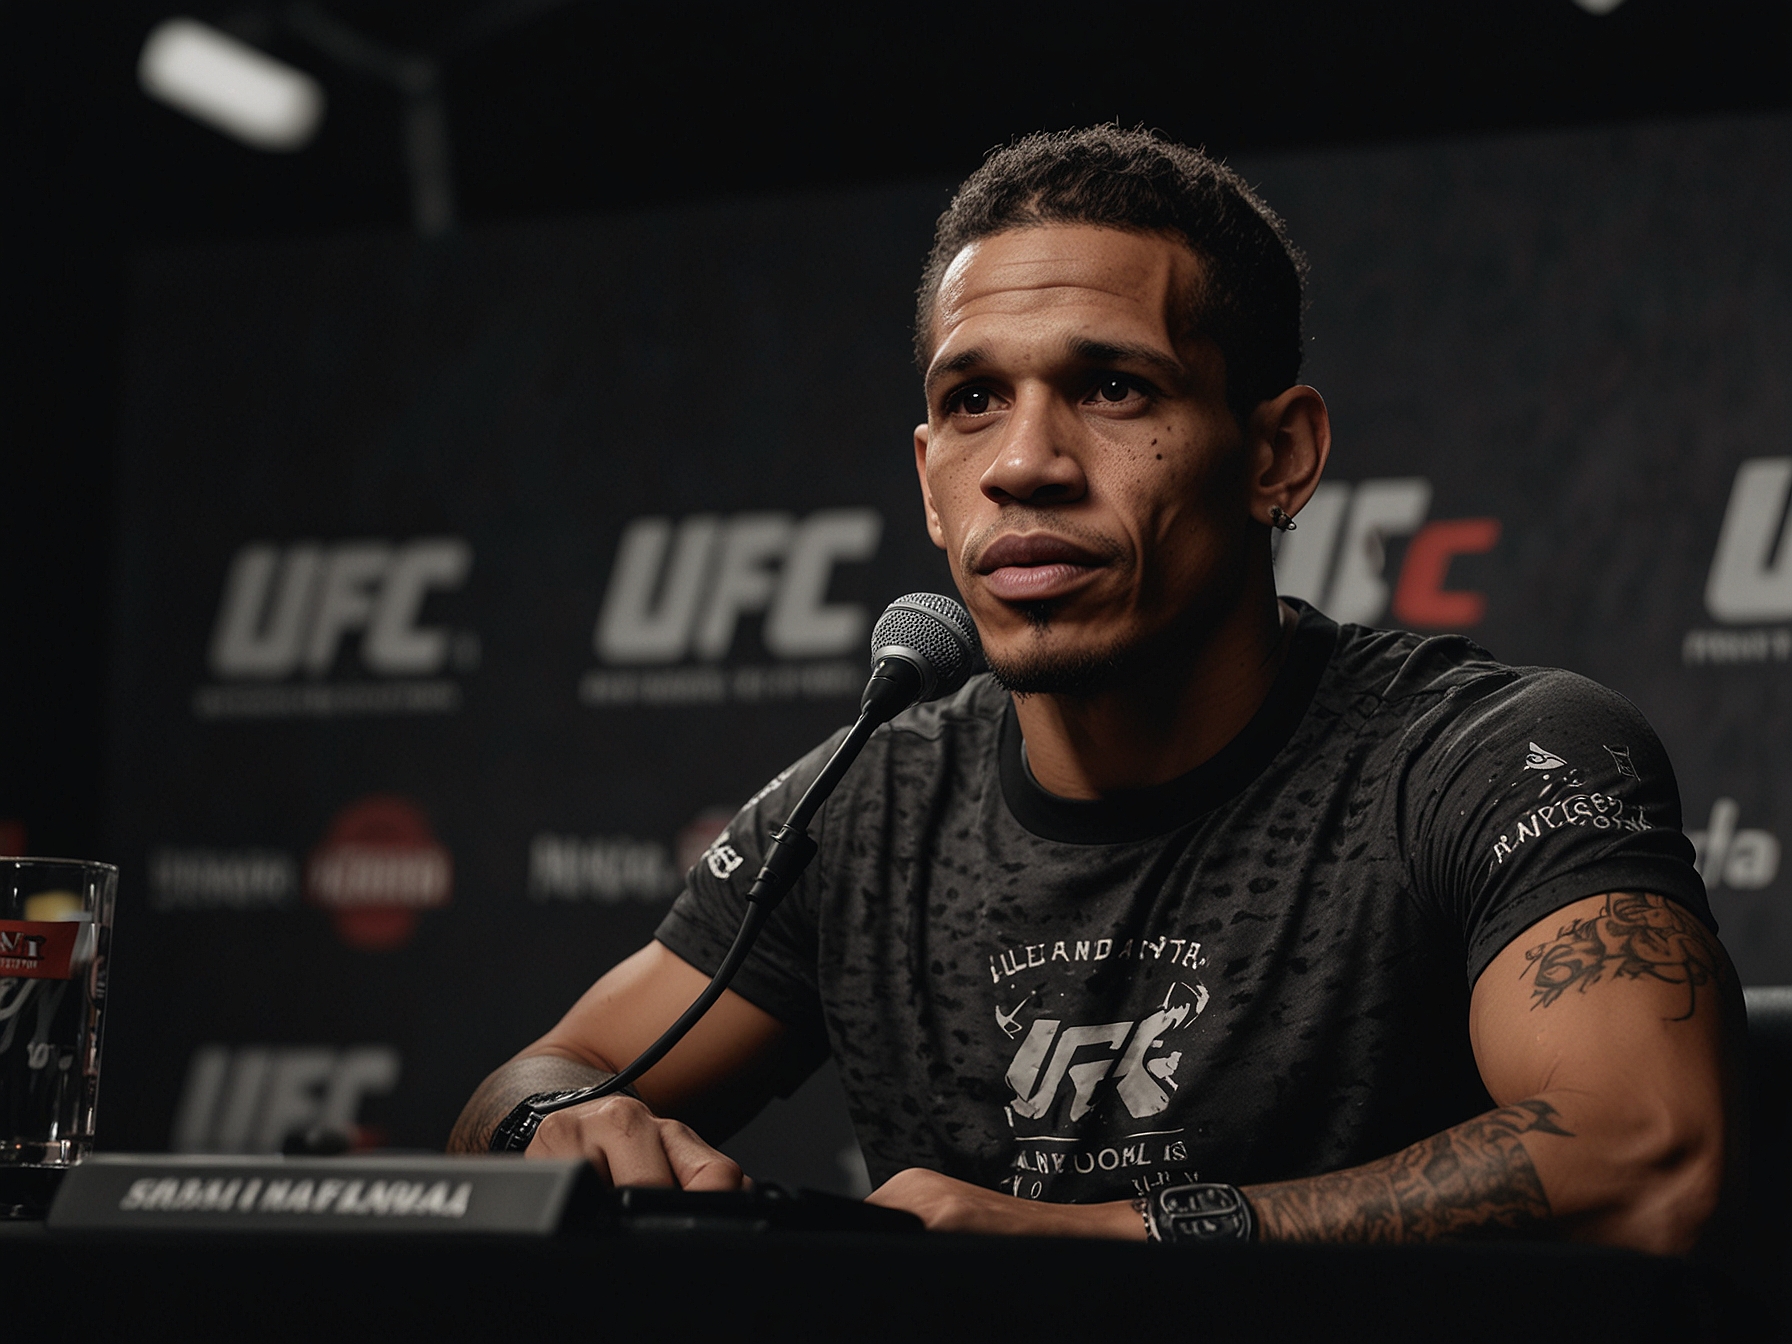 Charles Oliveira speaking in a press conference, addressing the media with a serious expression, clarifying the widespread speculative fight rumors about his future UFC matchups.